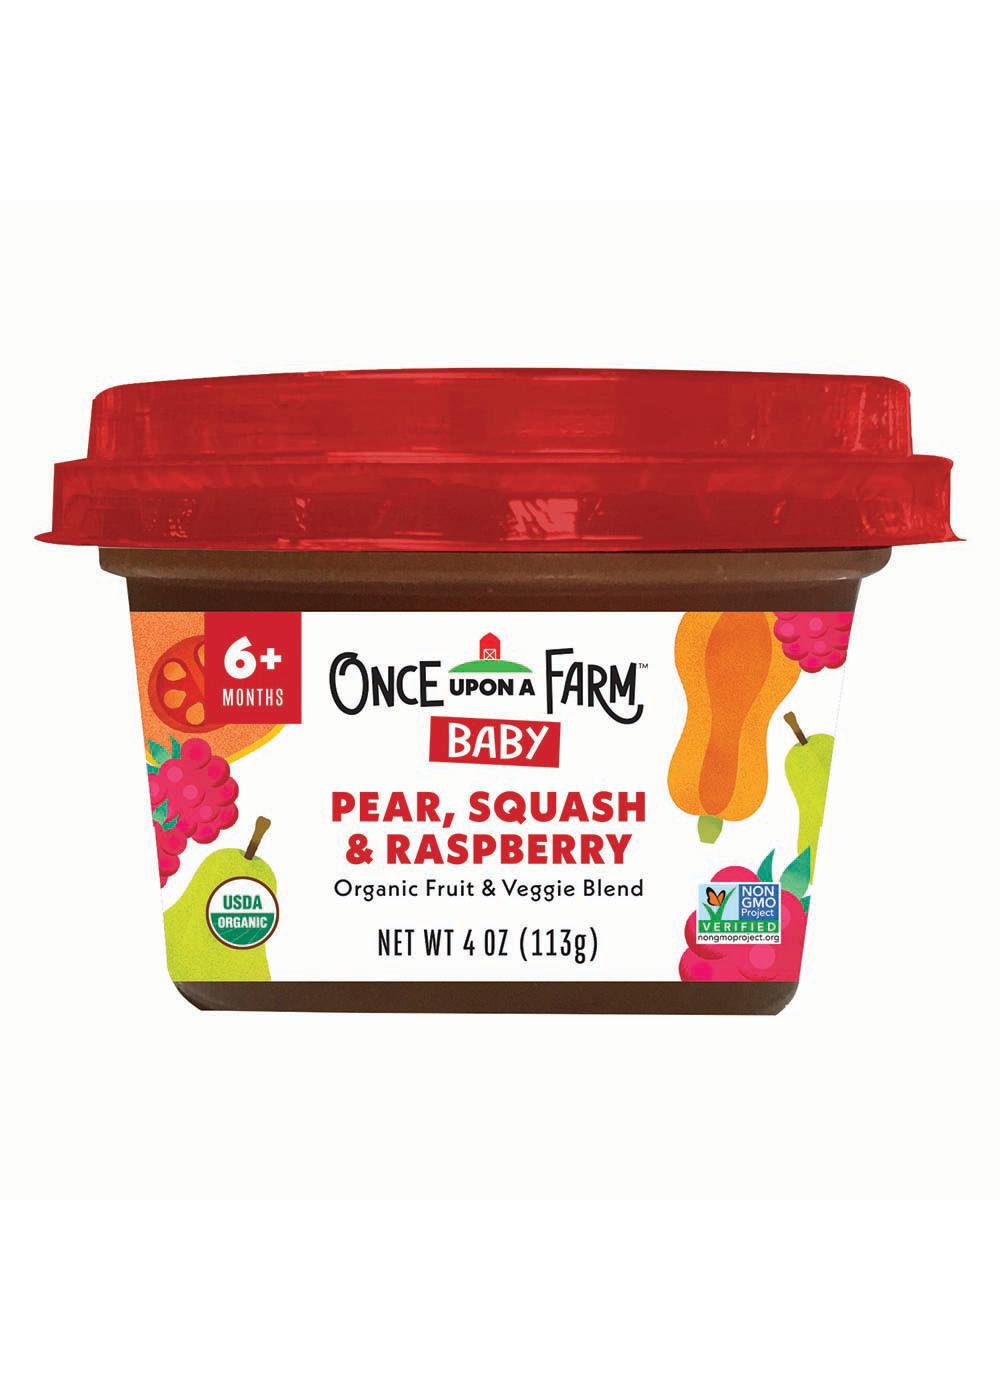 Once Upon a Farm Organic Baby Food - Pear Squash & Raspberry; image 1 of 2